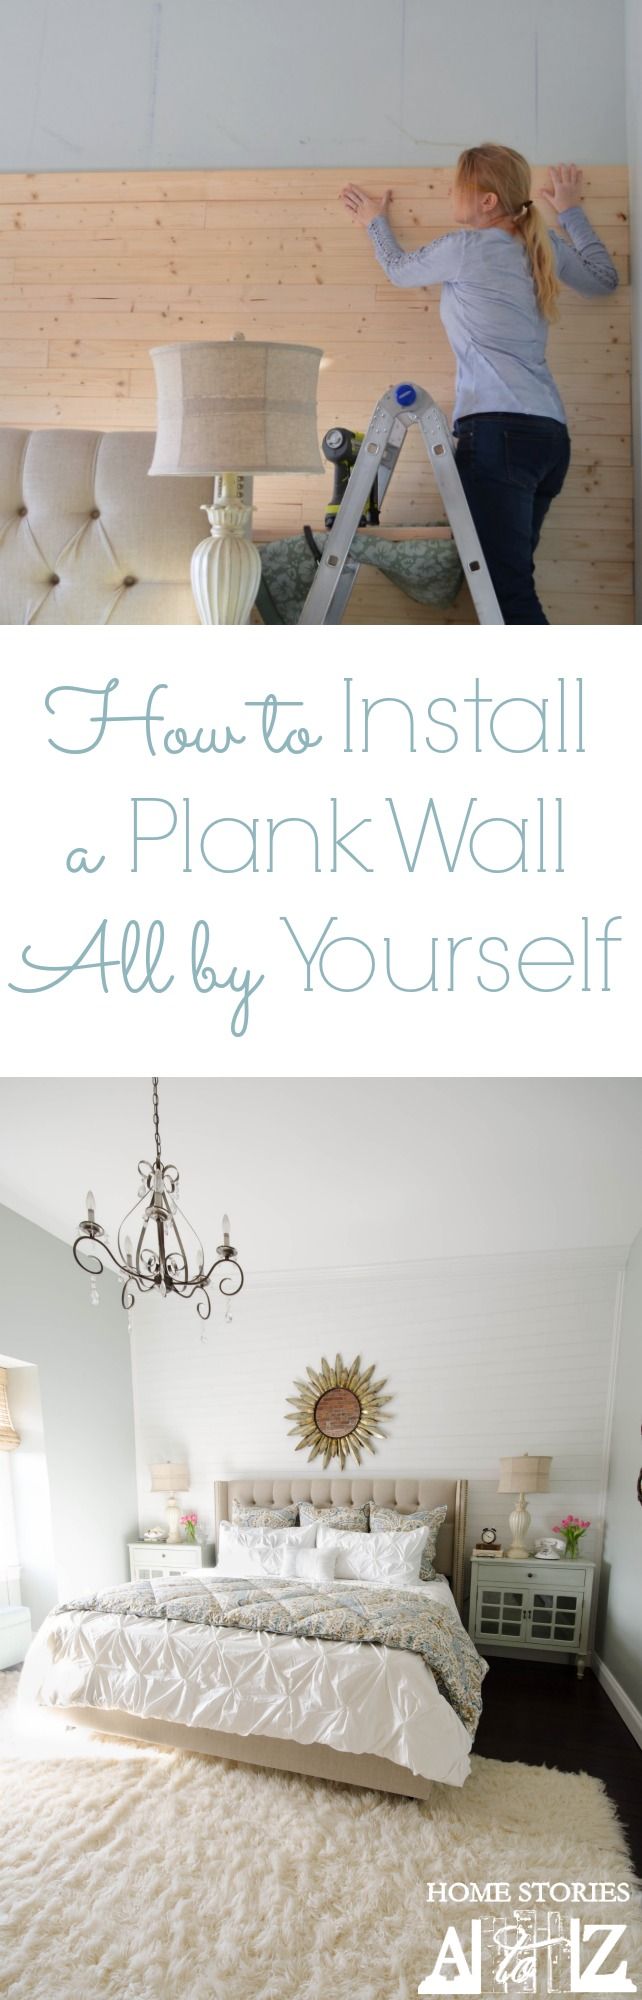 How to install a plank wall all by yourself. No help needed! You can do this. :)...